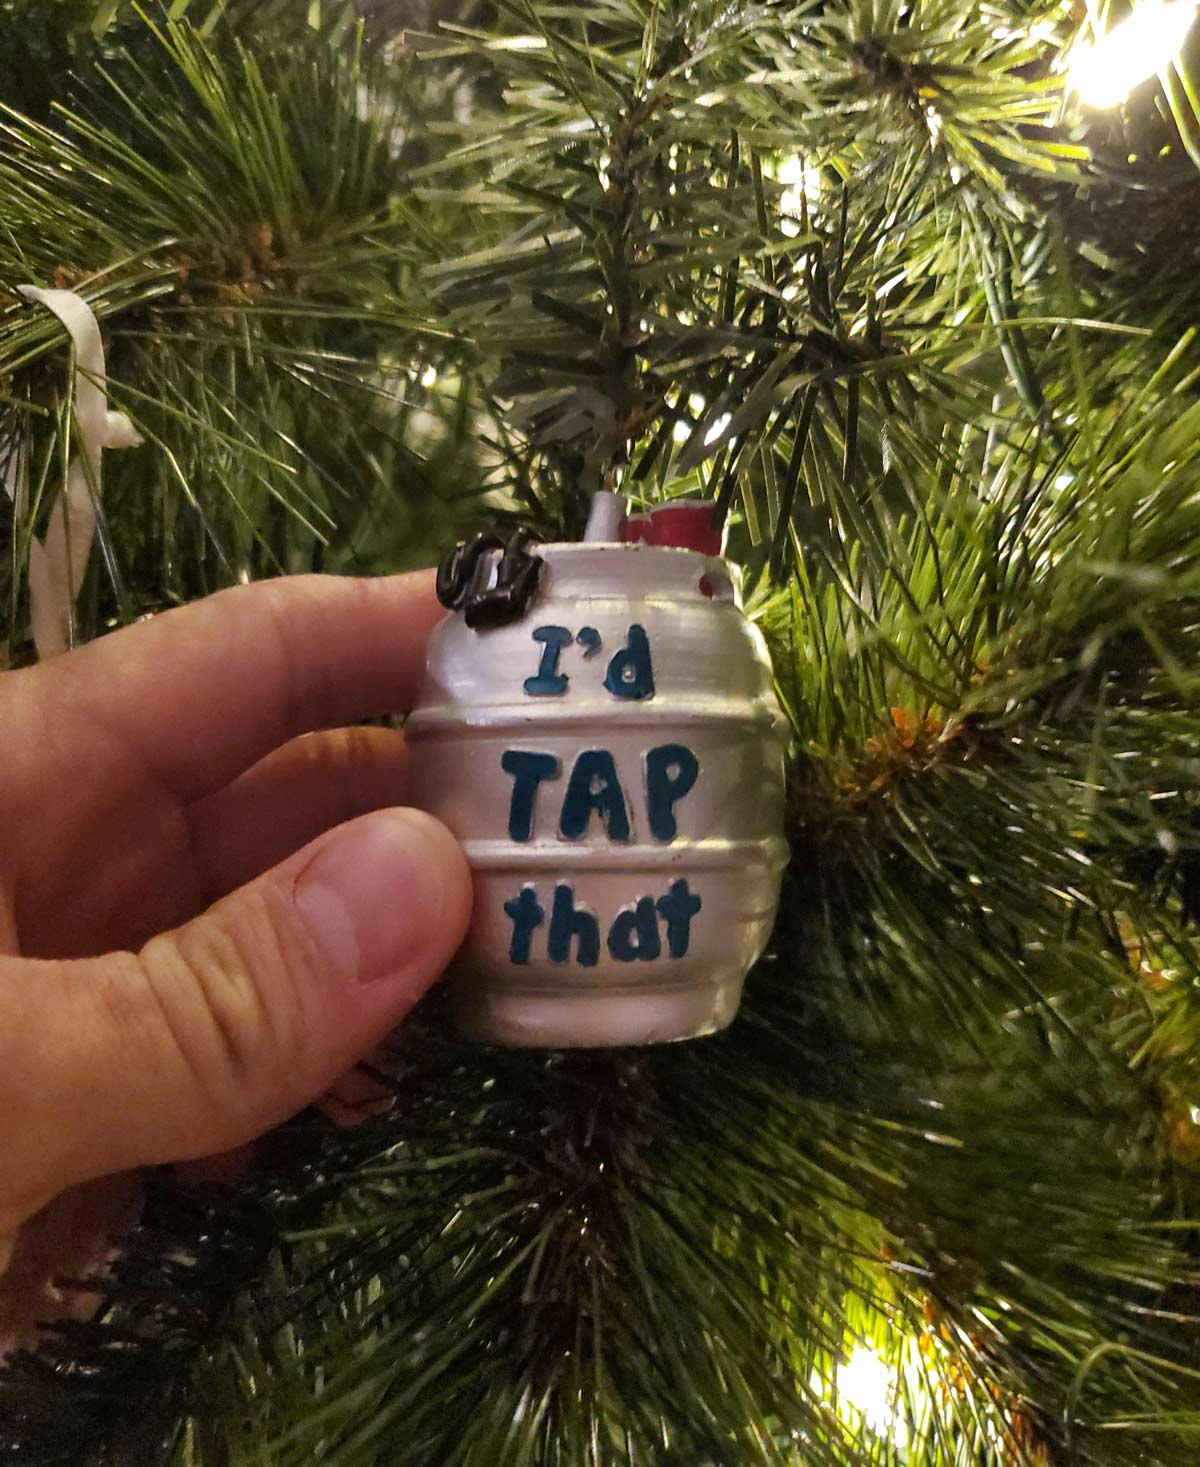 This time of the year always has me thinking about the time my mom, with a straight face, gave me this ornament because I "like beer."